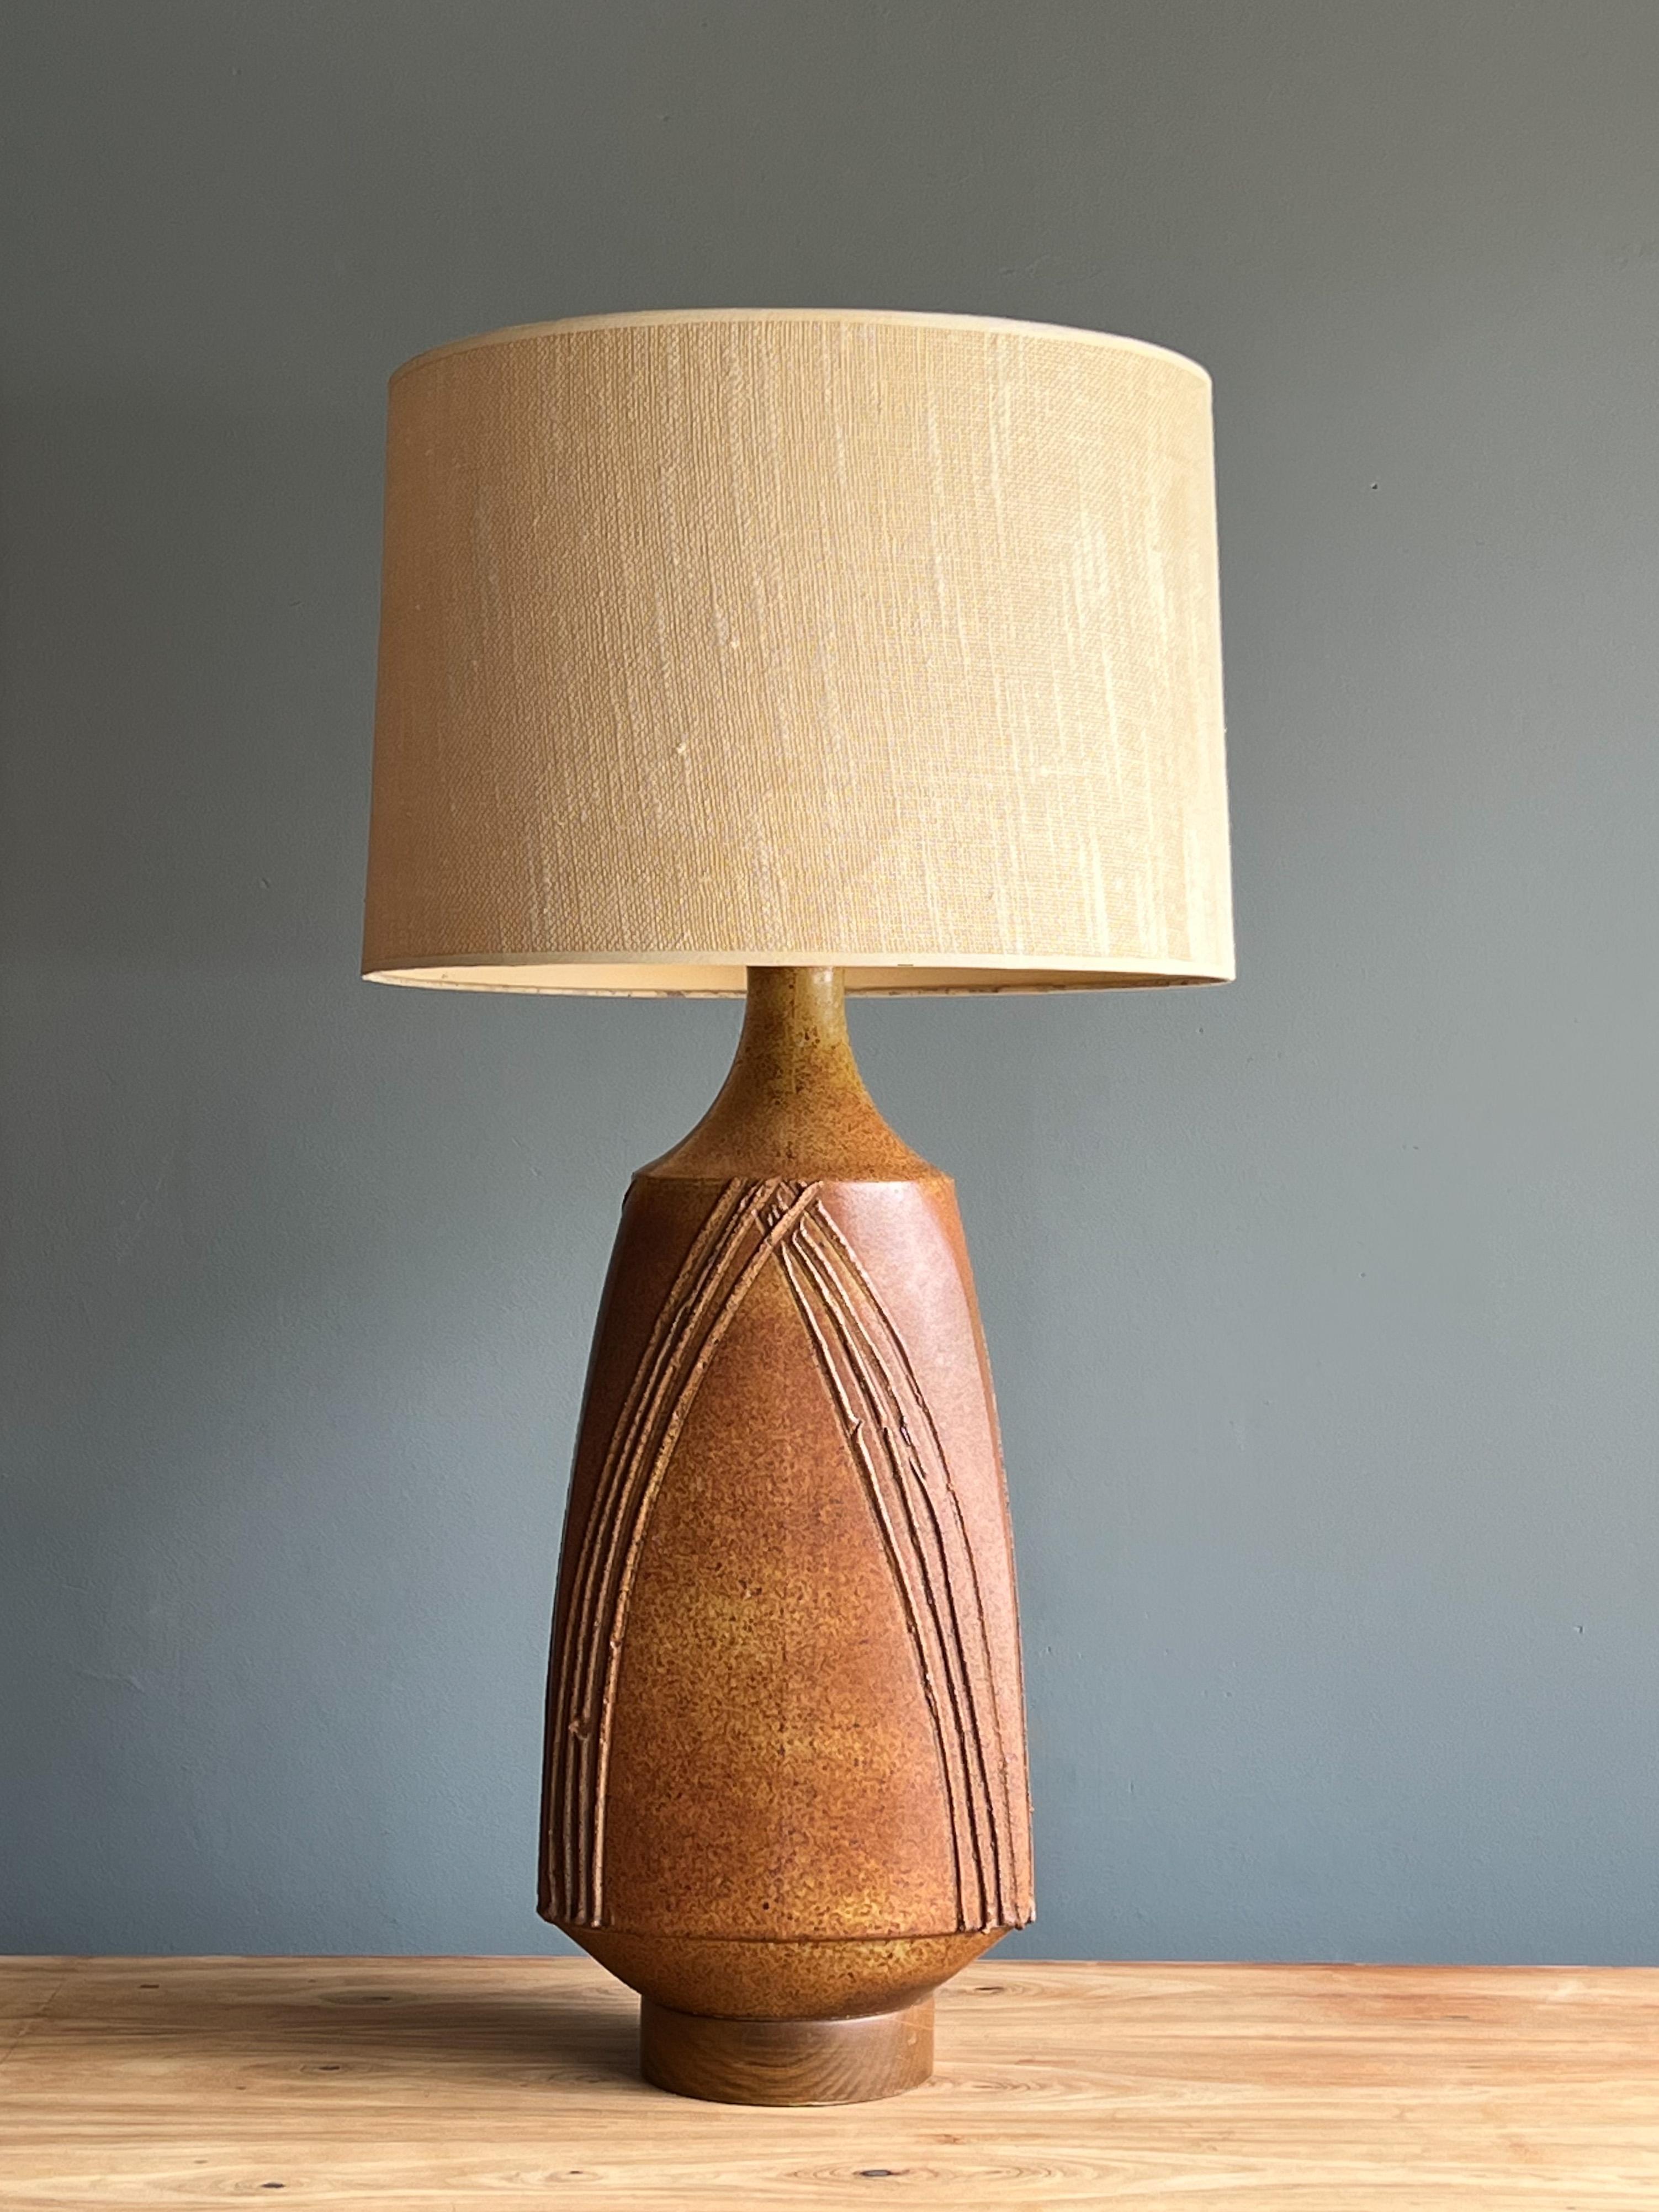 Beautiful ceramic table lamp designed by renowned pottery and glaze master David Cressey, California 1960s.

This example features a lovely speckled glaze with a neutral color pallet on top of a walnut base and brass stem. The glaze consists of